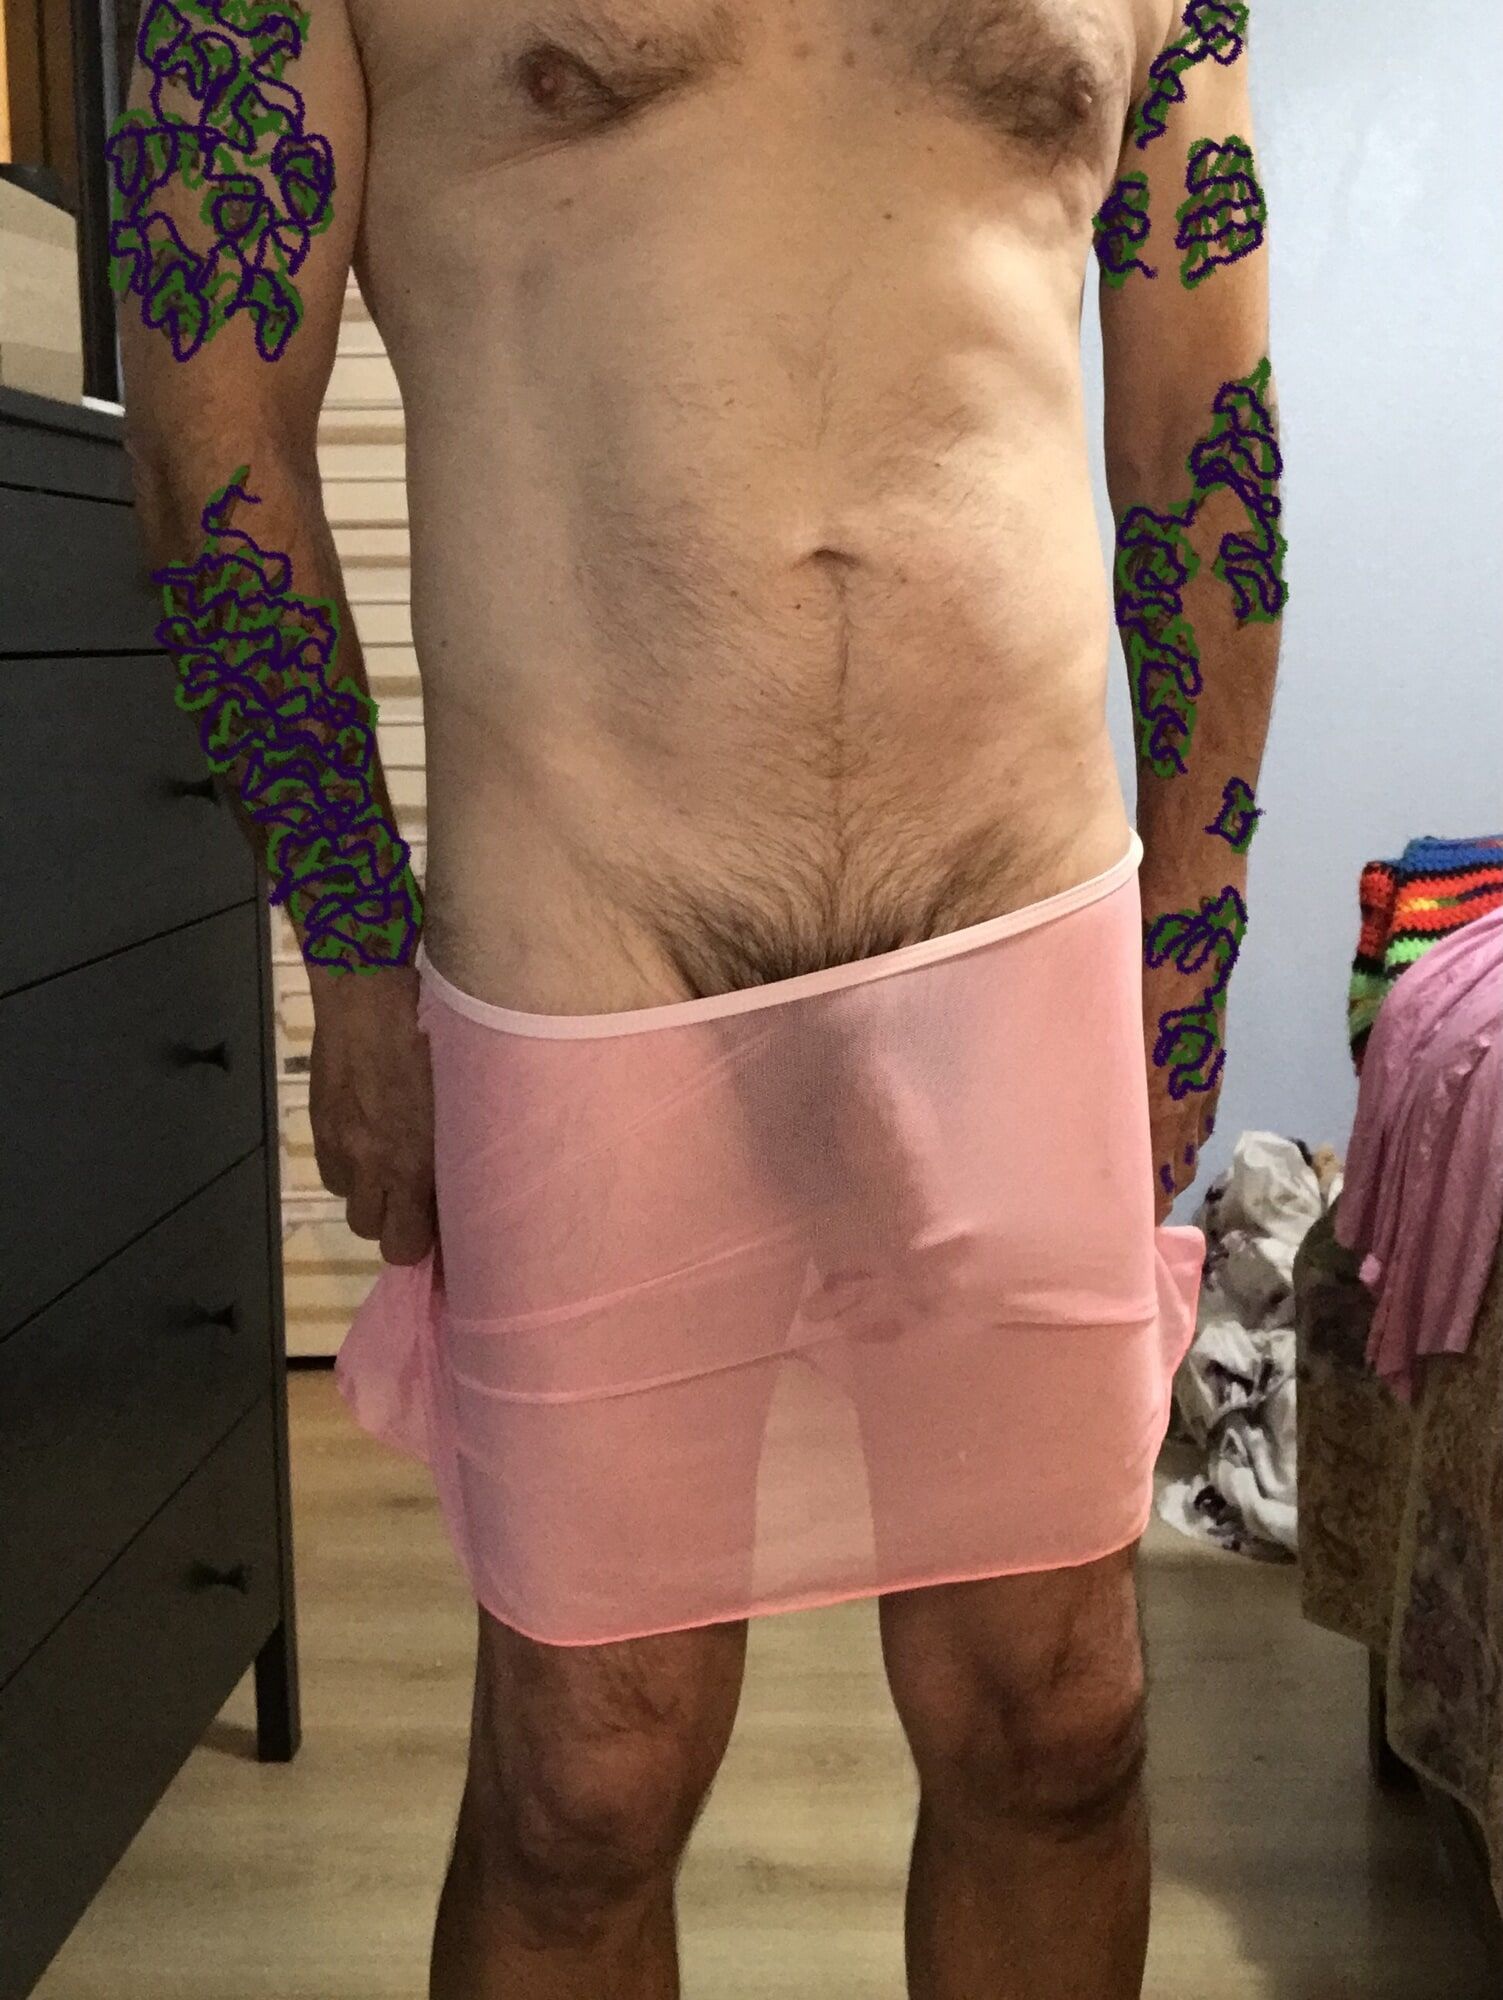 My lil bulge in some skirts #27